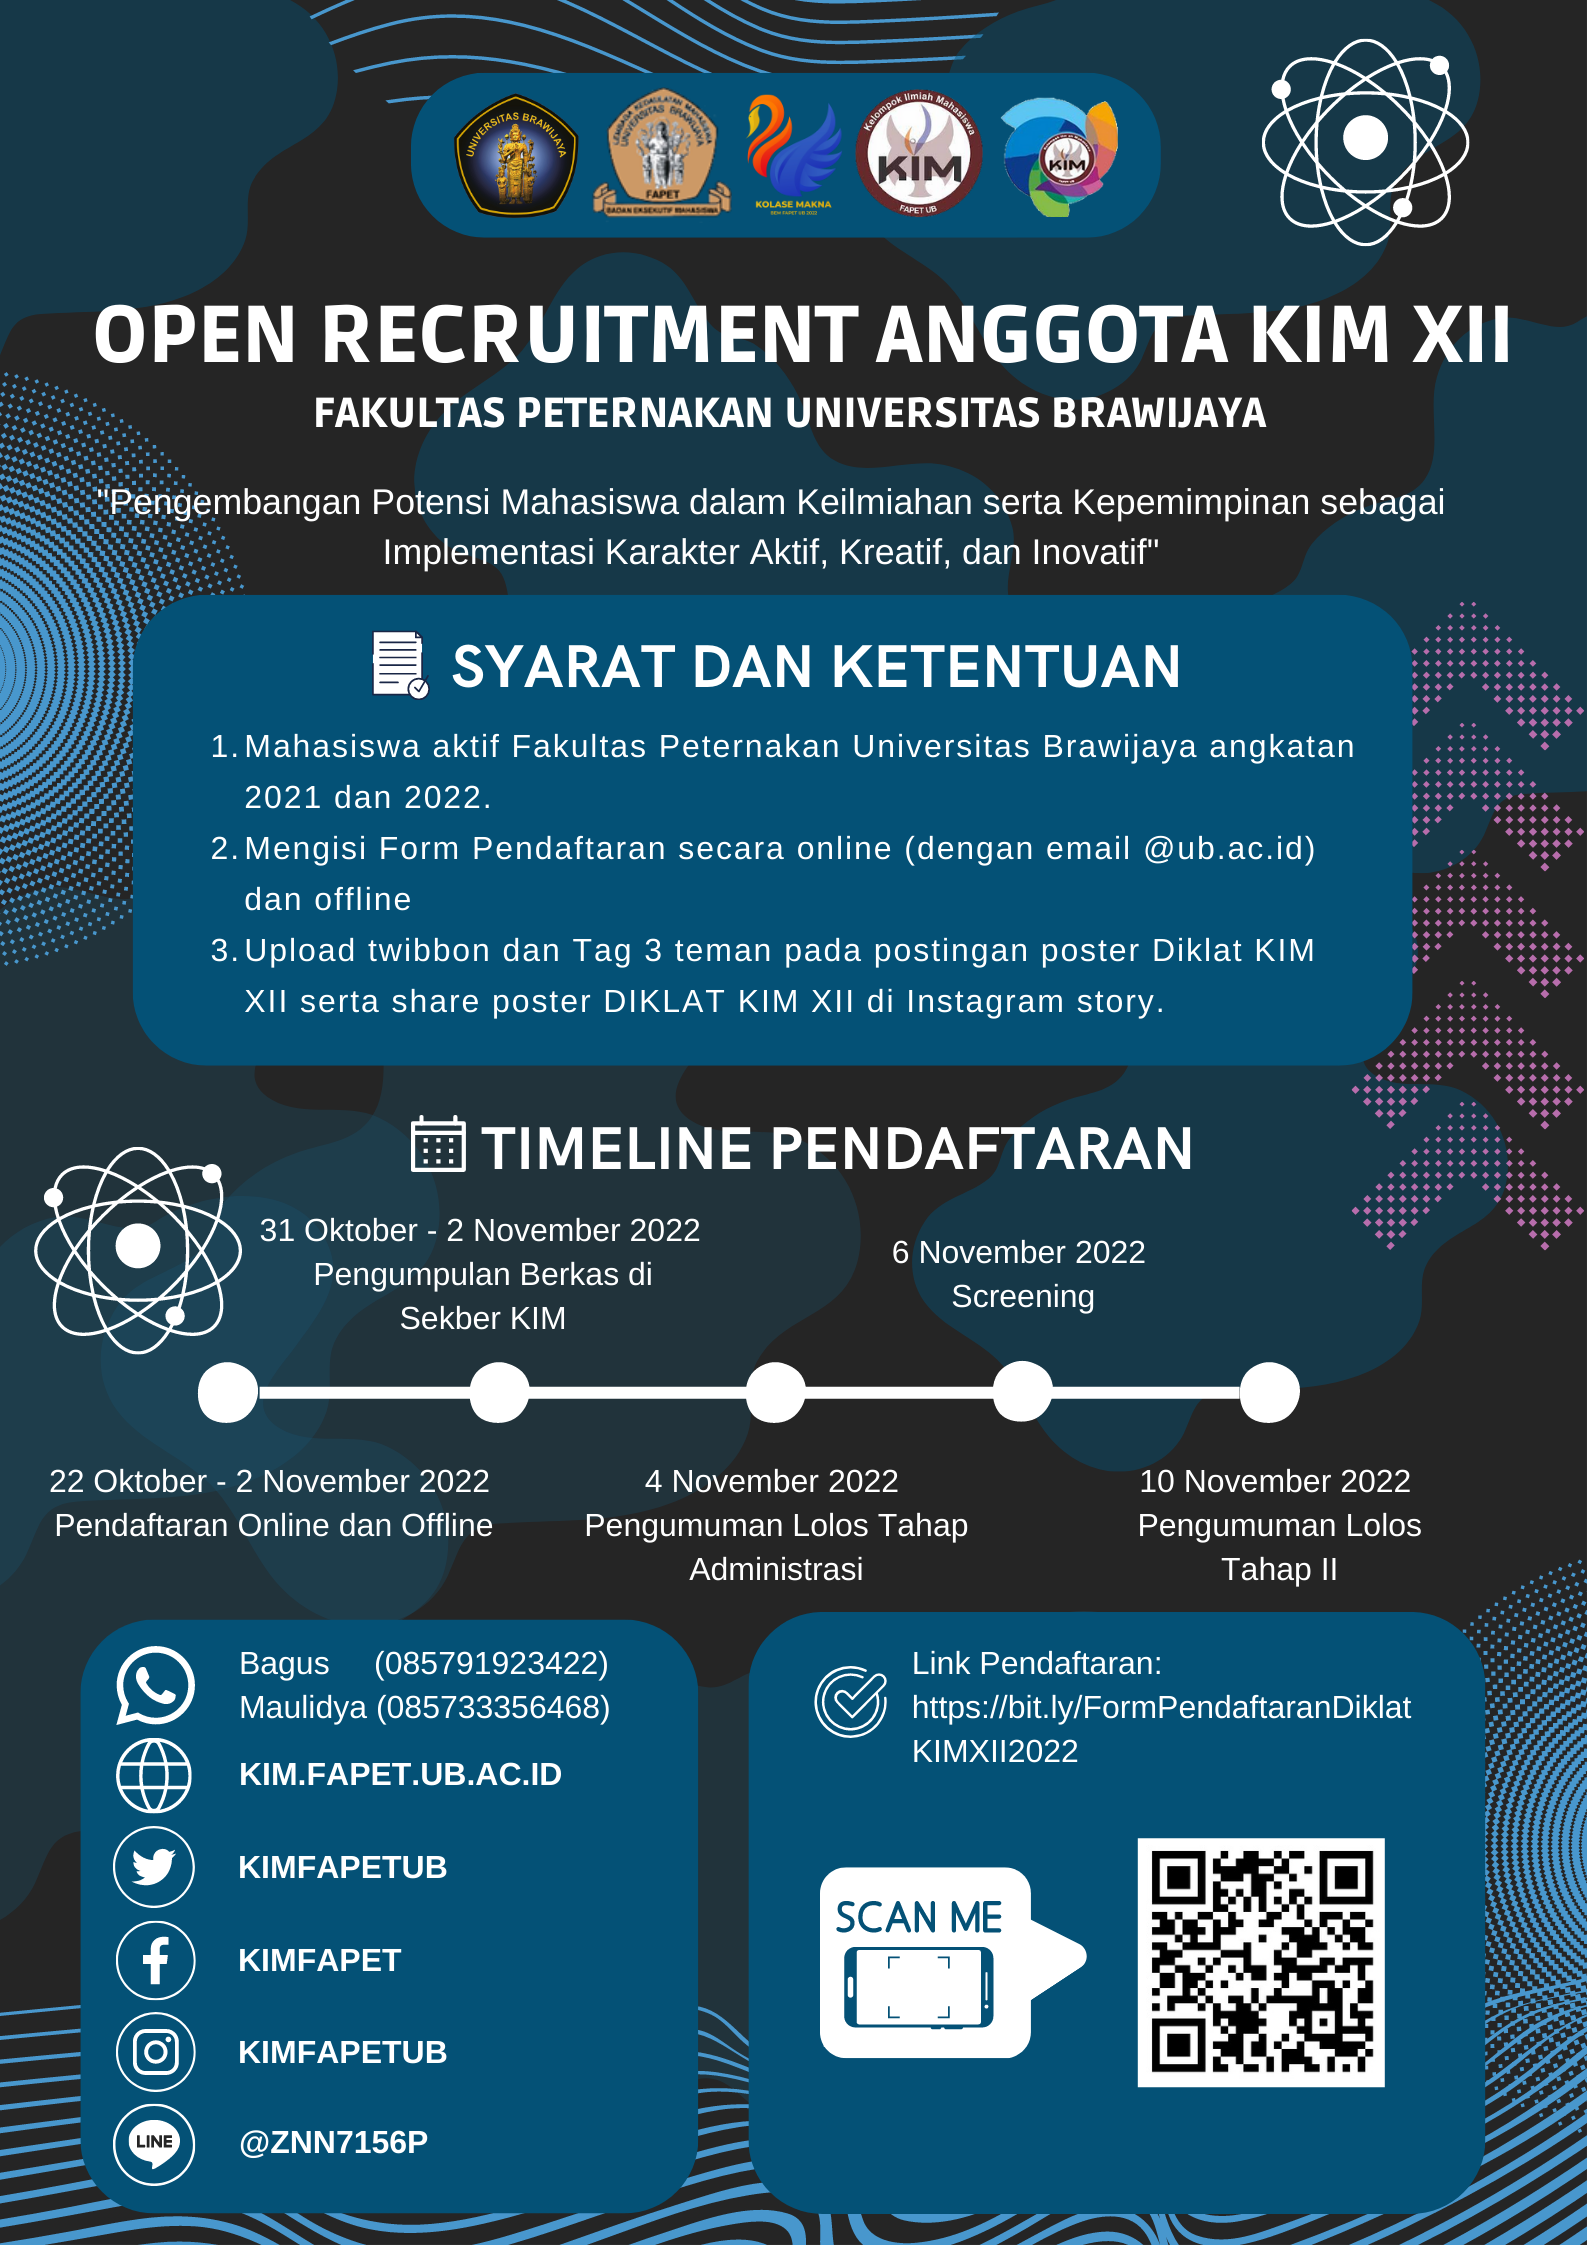 Open Recruitment for New Members of KIM XII